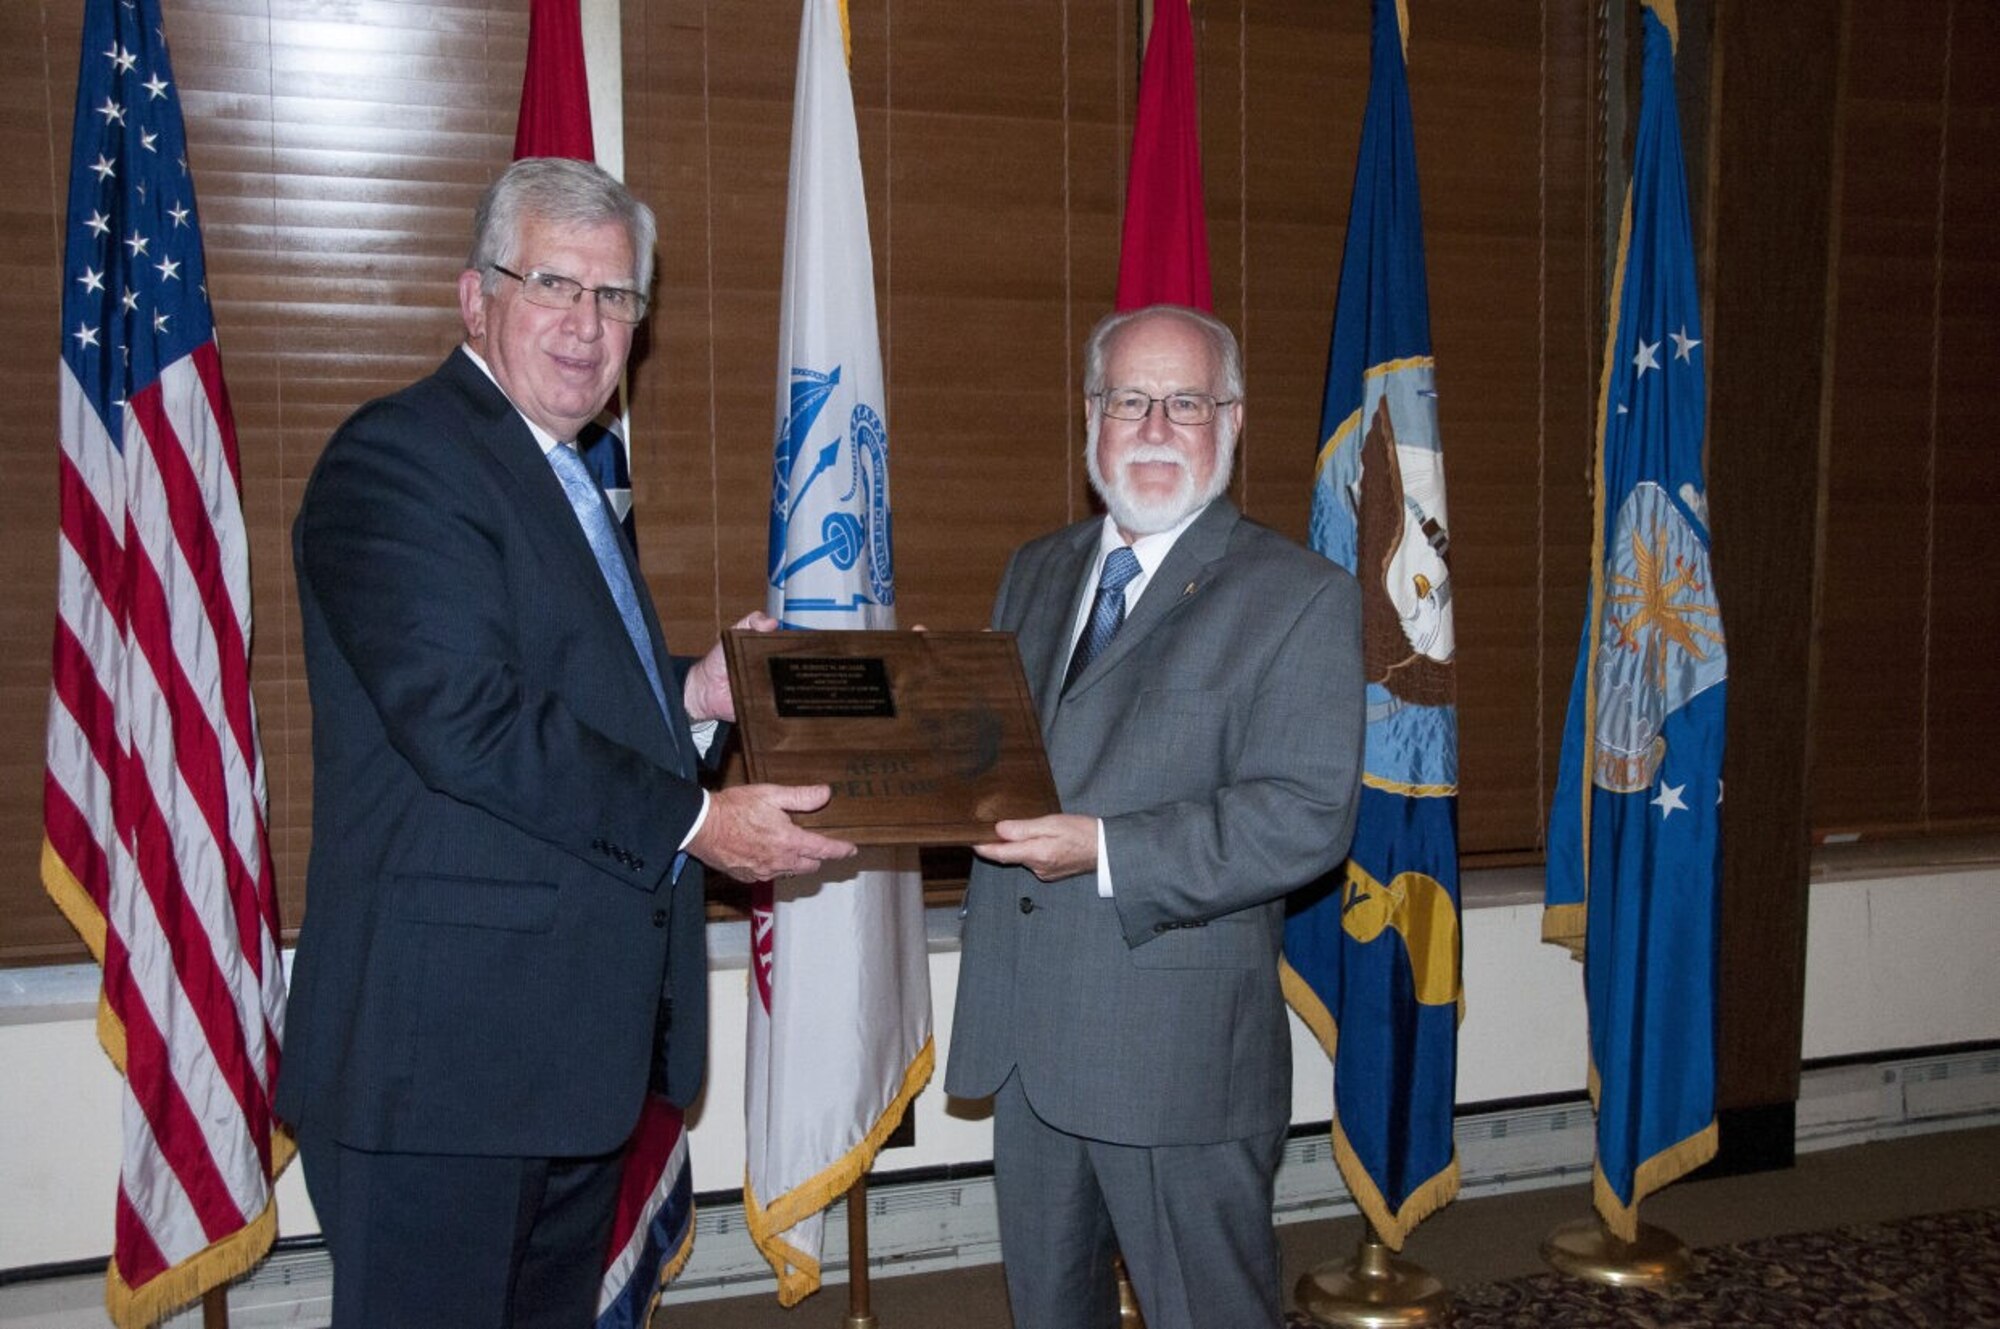 Claude Morse, right, receives the Arnold Engineer Development Complex Lifetime Achievement Fellows plaque from then-AEDC Chief Technologist Dr. Edward Kraft during a June 24, 2016, banquet at the Arnold Lakeside Complex to recognize his induction as an AEDC Fellow. Morse, who worked at Arnold for more than 30 years and is credited for marketing the capabilities of AEDC to the media, national and international industry, and the local community, passed away Nov. 12, 2023, at the age of 79. (U.S. Air Force photo by Holly Peterson)